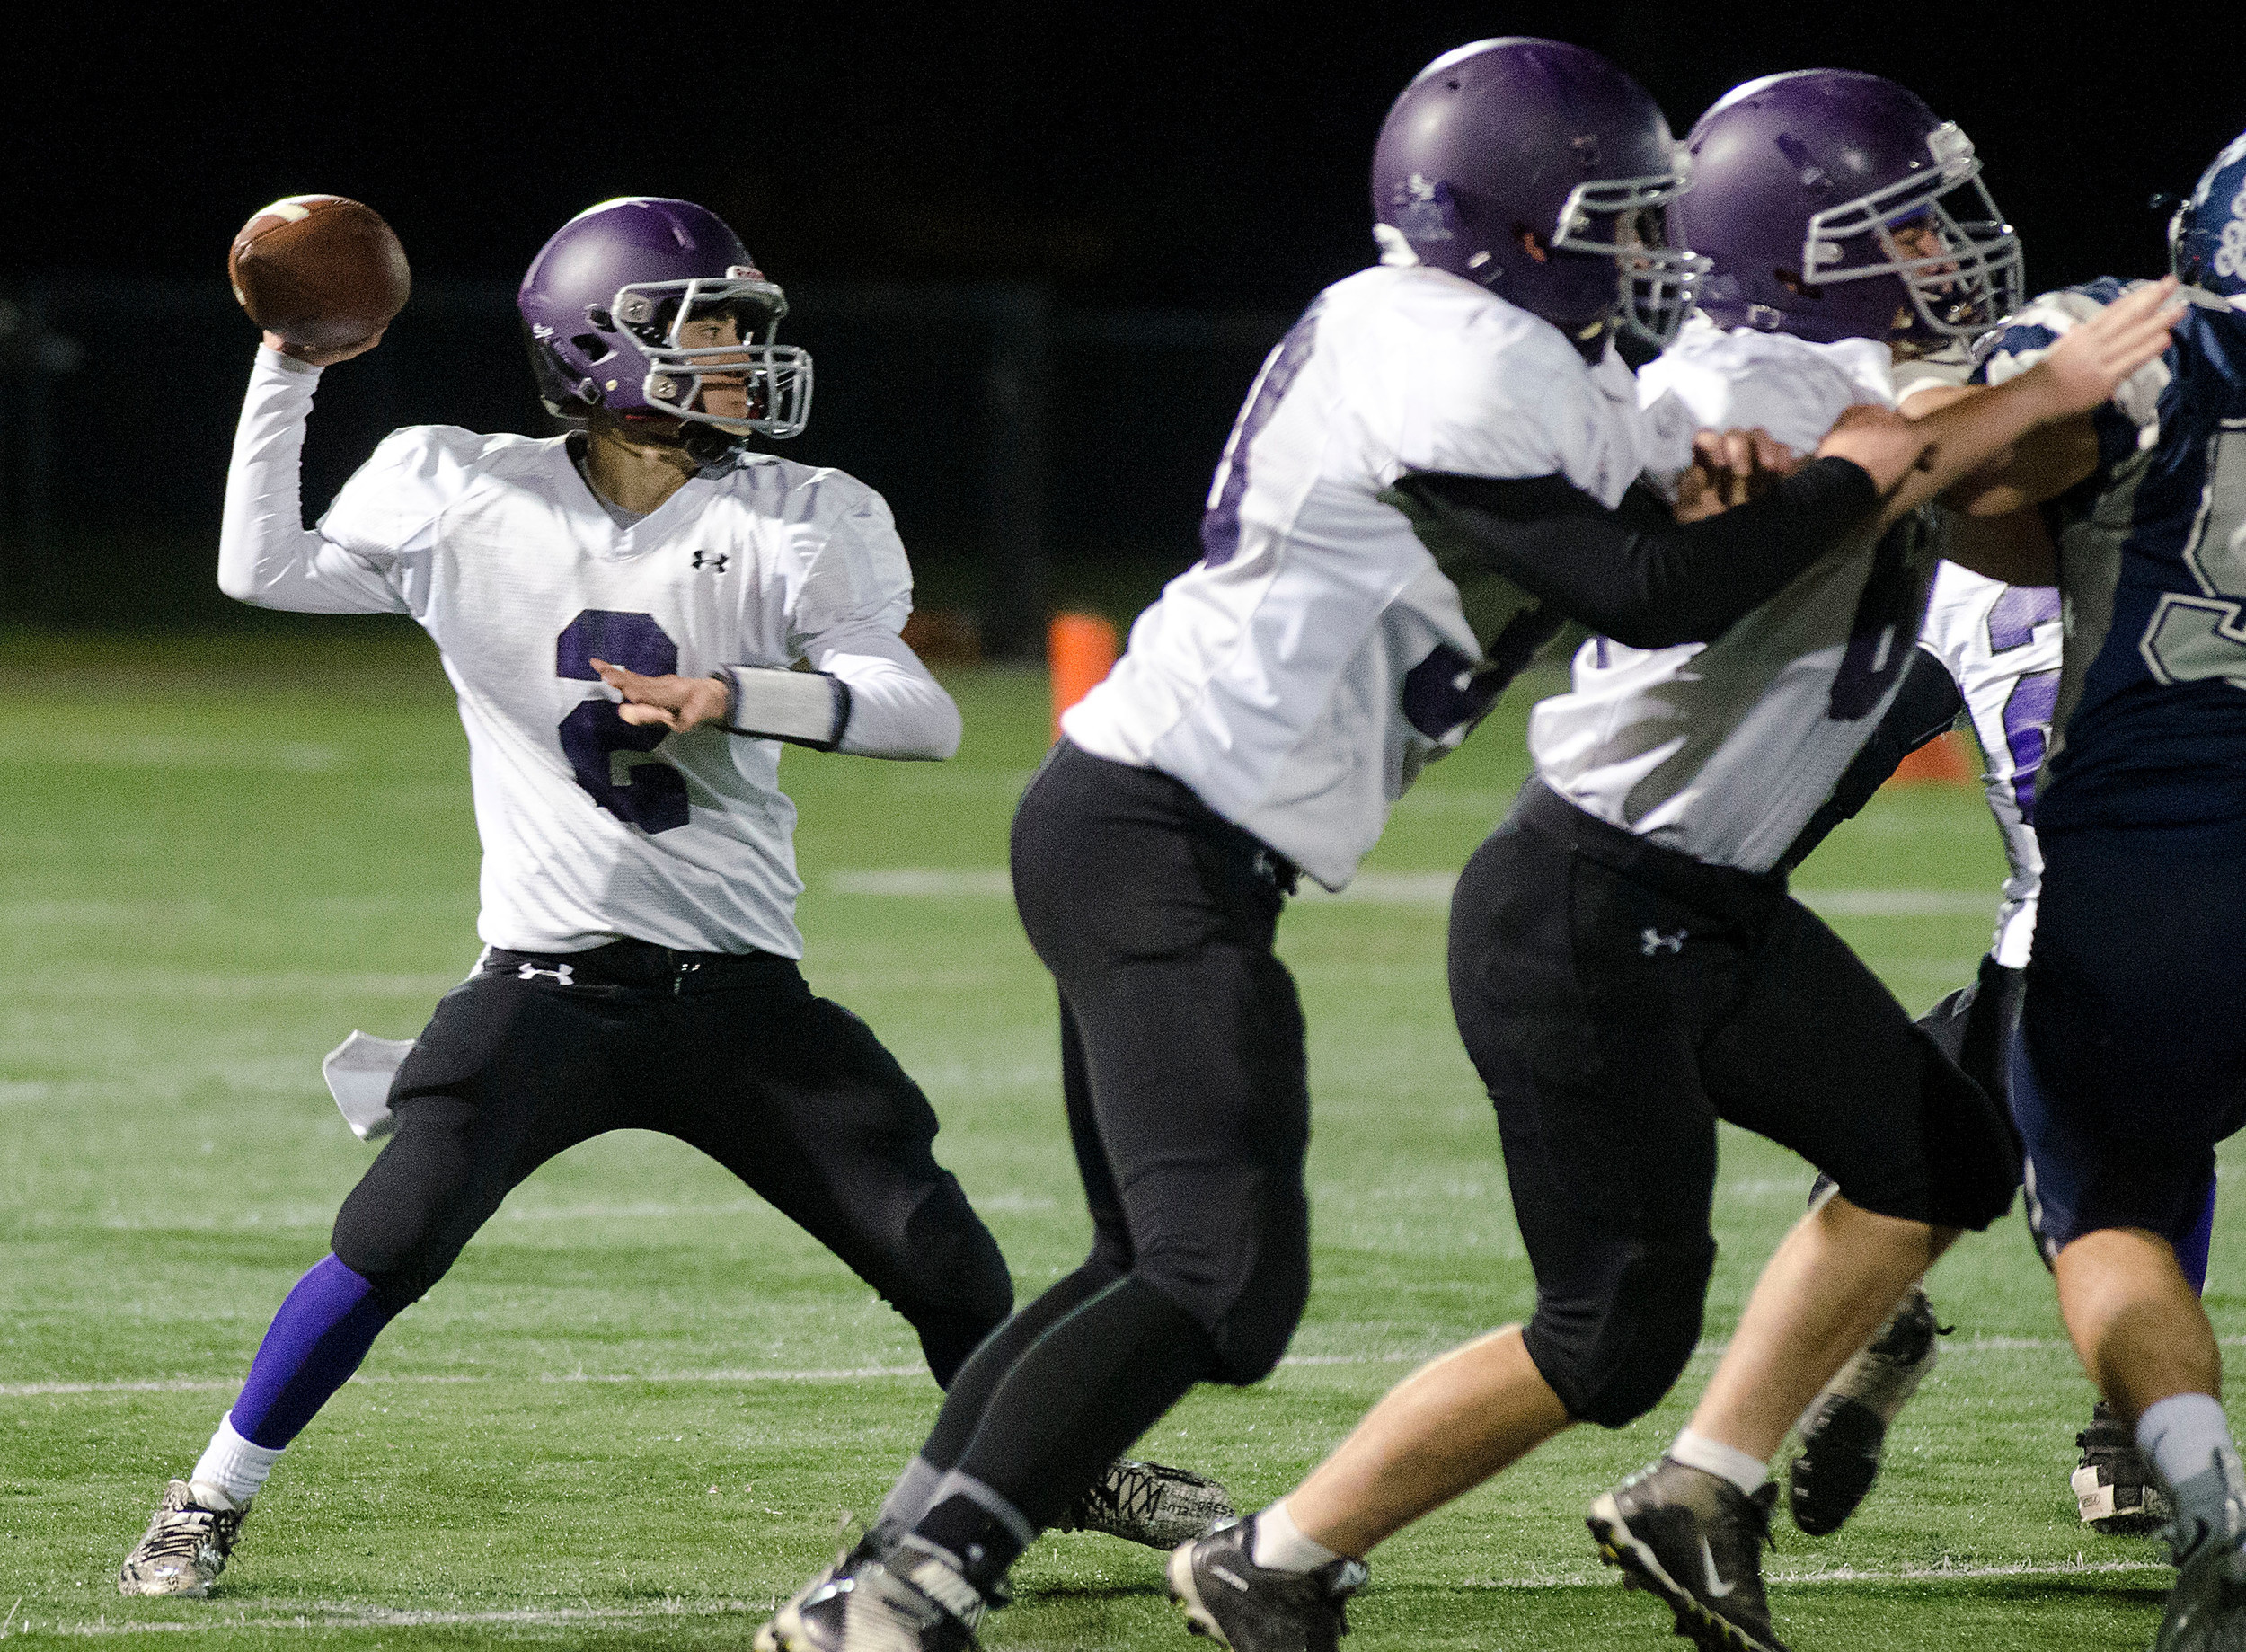 Huskies quarterback Vincent Berretto looks to pass down field in the second half.